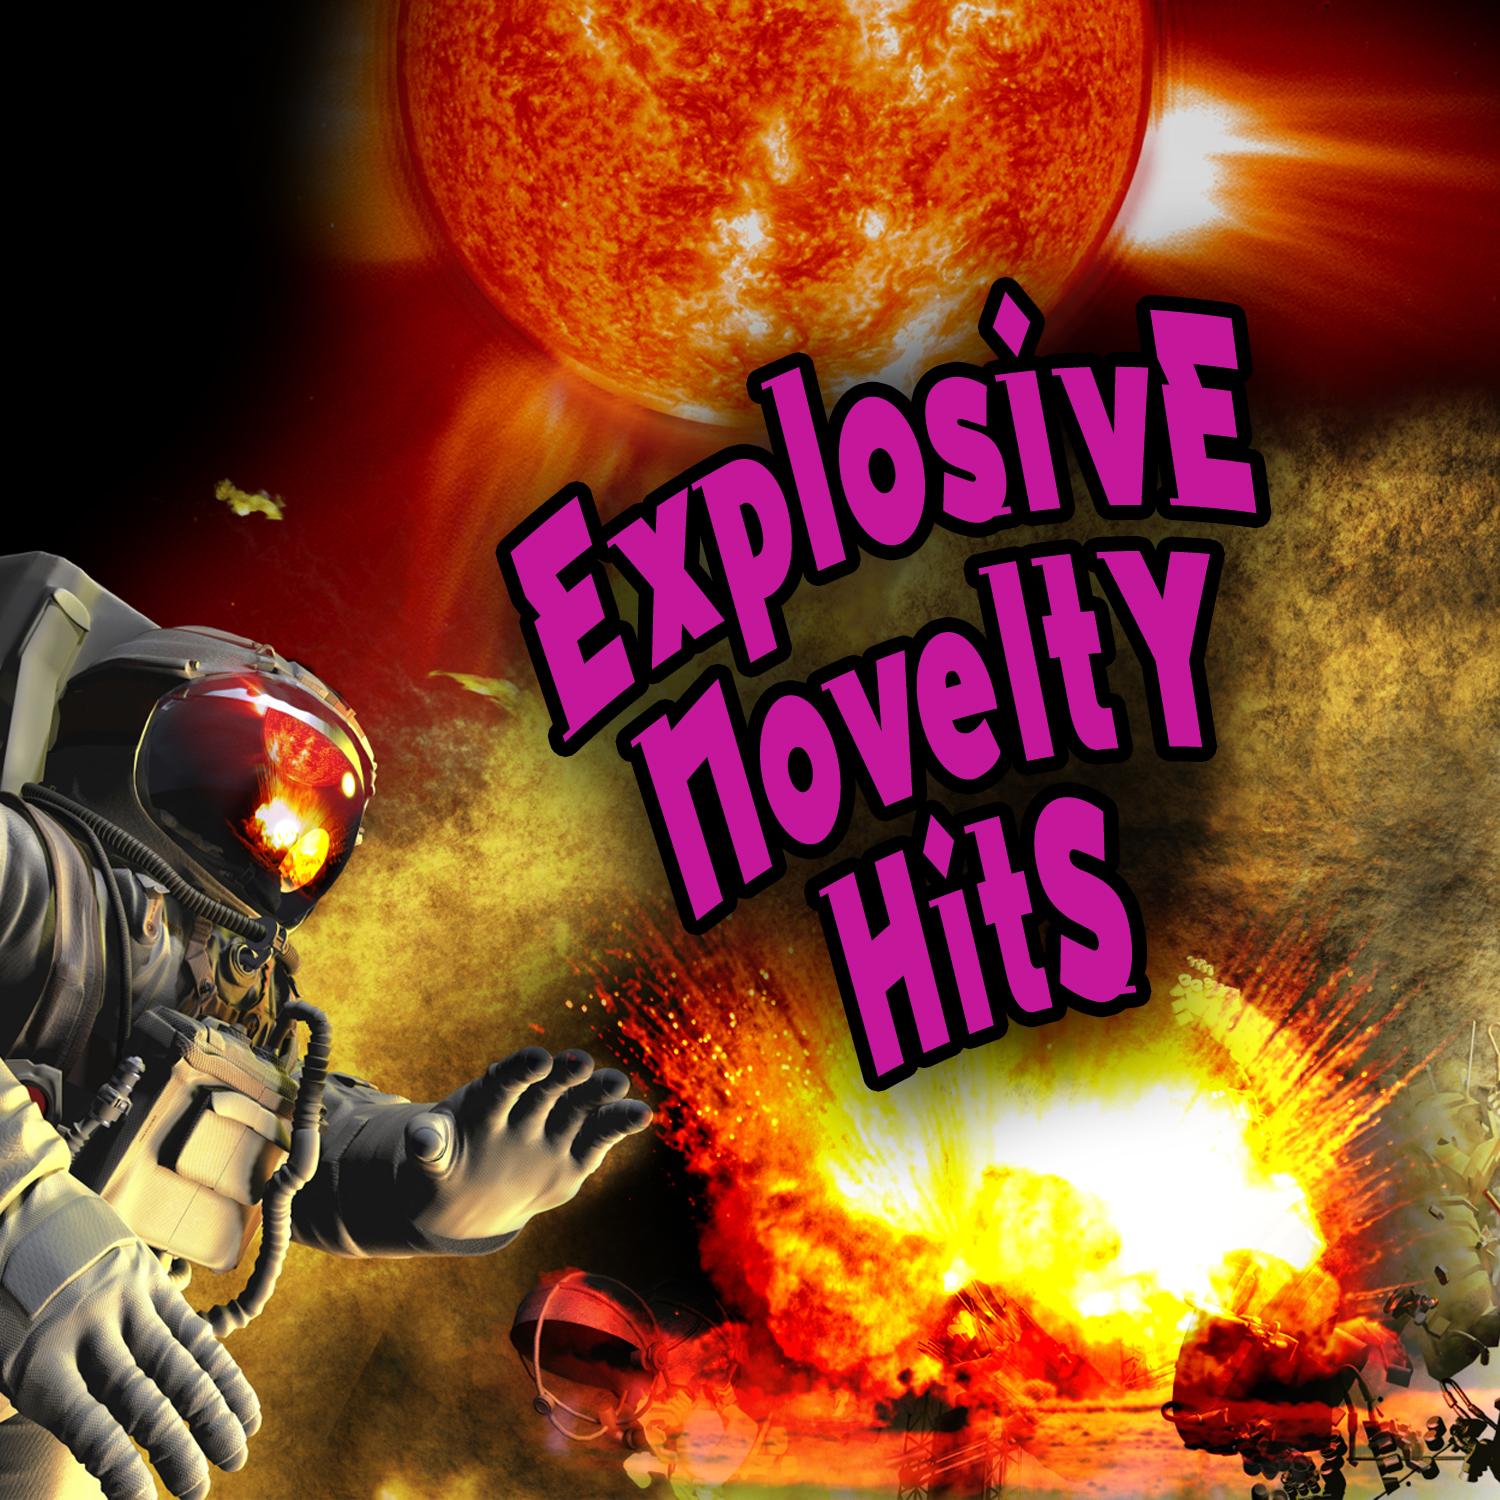 Explosive Novelty Hits (Re-Recorded / Remastered Versions)